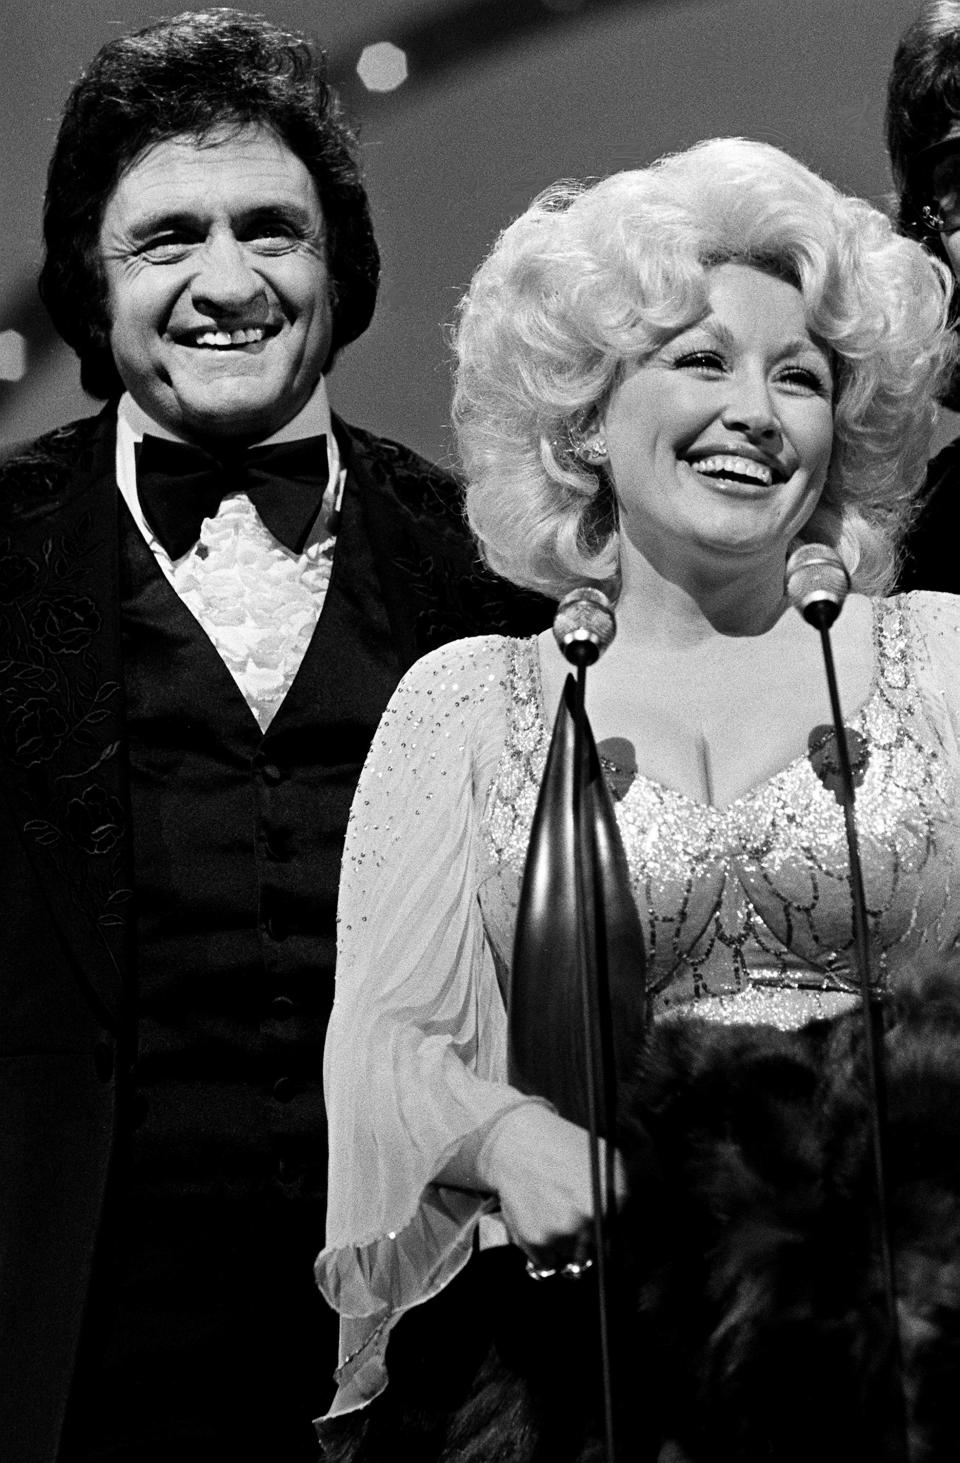 Dolly Parton speaks after winning the Entertainer of the Year award during the 12th annual CMA Awards show at the Grand Ole Opry House on Oct. 9, 1978. Looking on is presenter and host Johnny Cash.